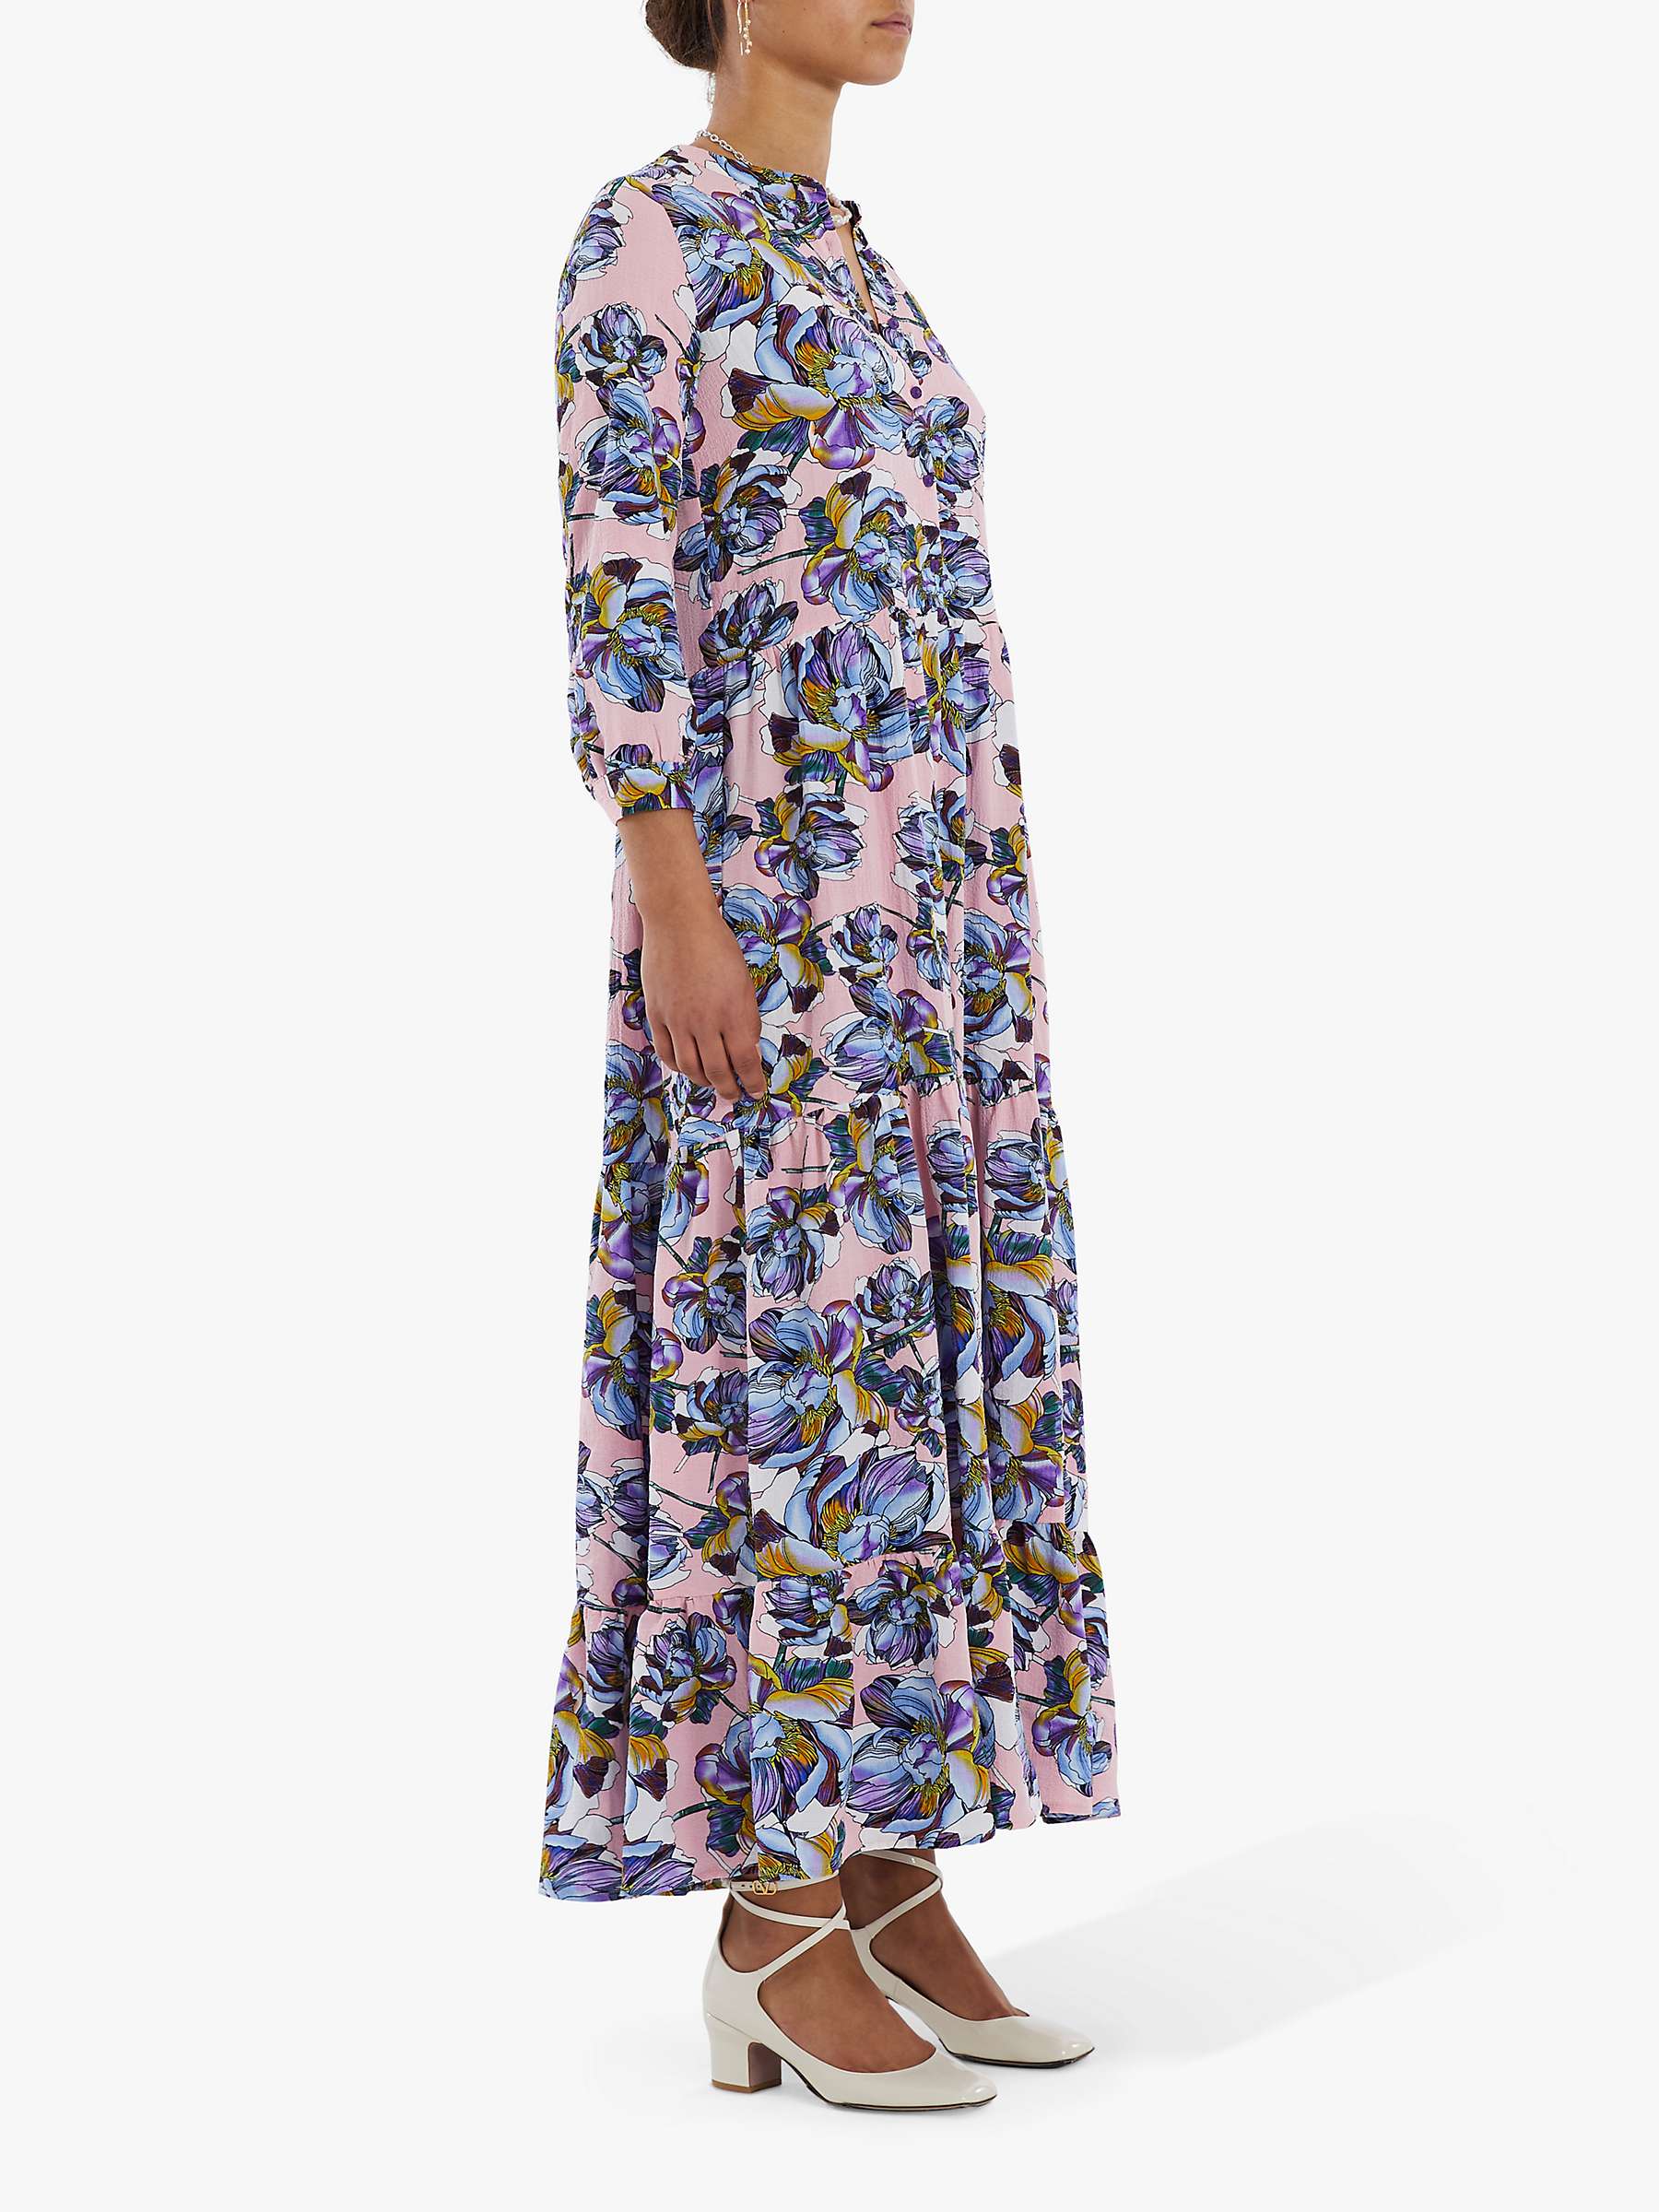 Buy Lollys Laundry Nee Long Sleeve Floral Print Maxi Dress, Multi Online at johnlewis.com